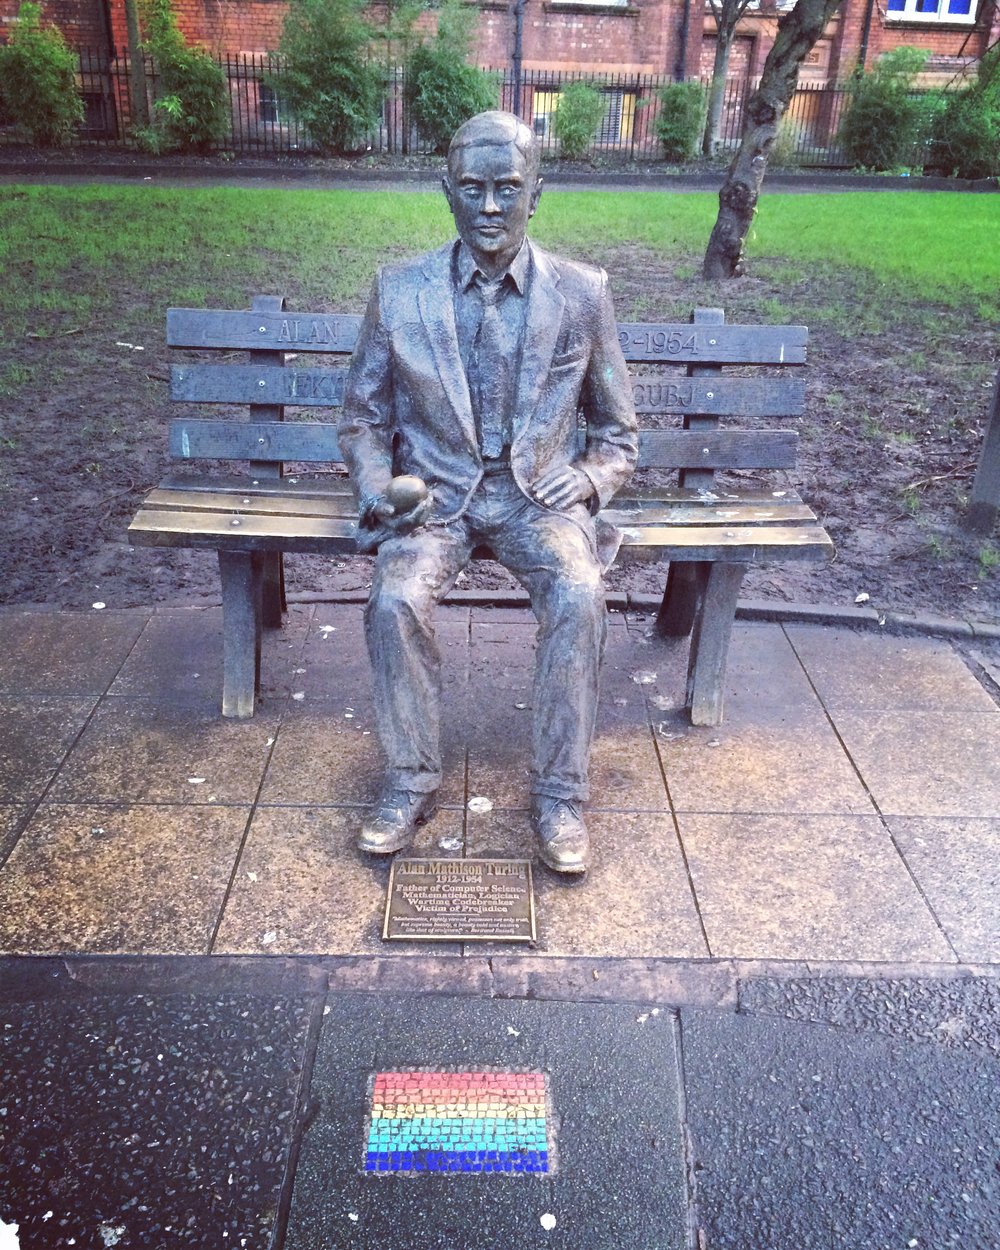 Tribute to Alan Turing in Manchester